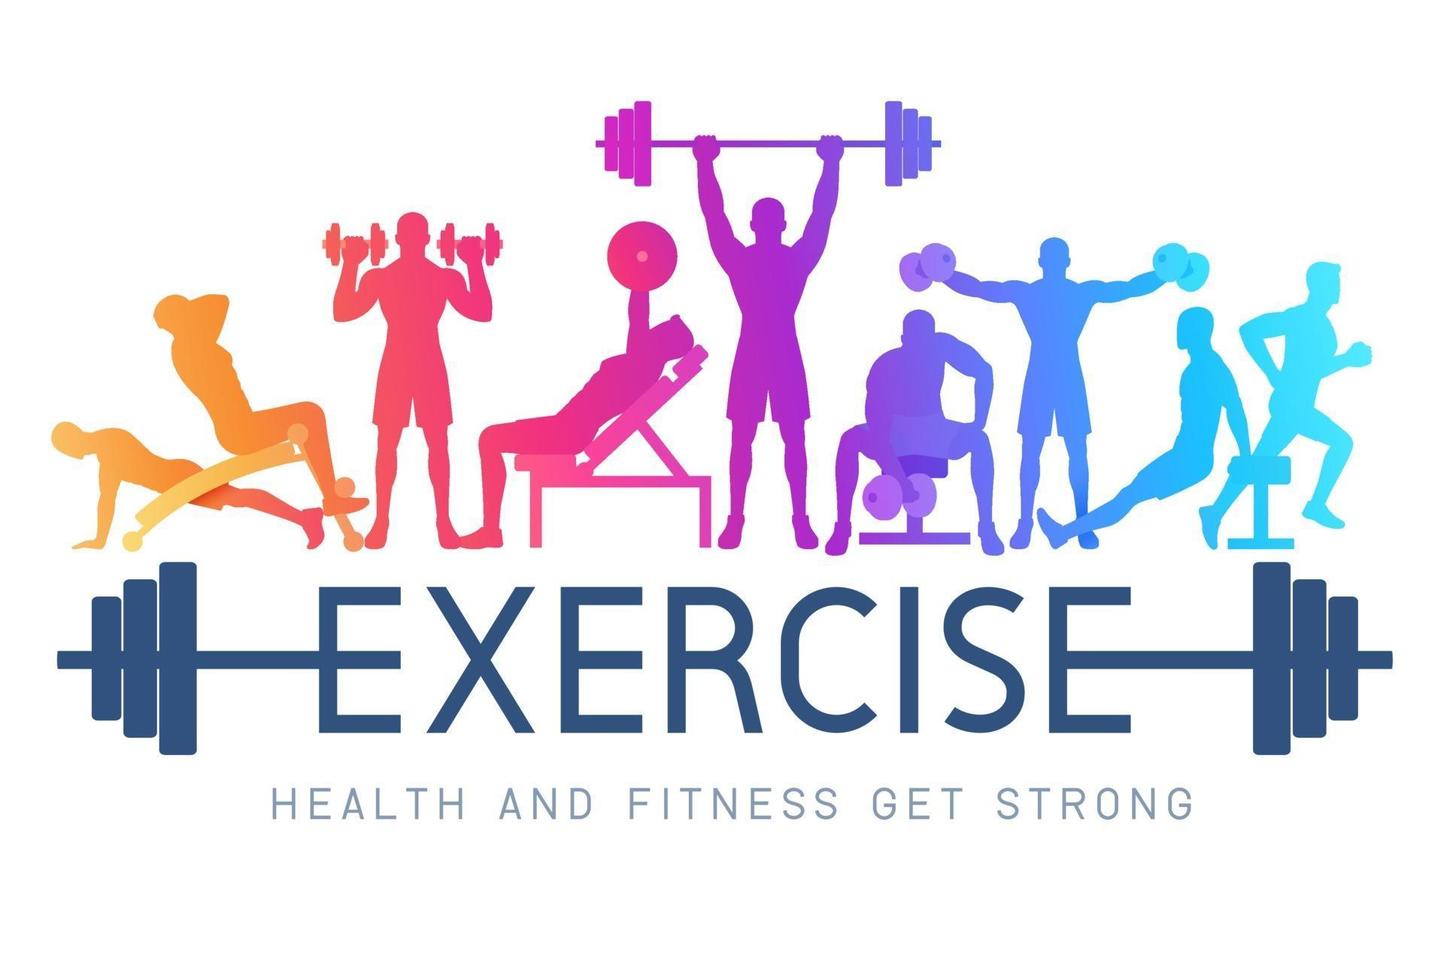 Exercises conceptual design. Young people doing silhouette workout. Sport Fitness banner promotion vector Illustrations.